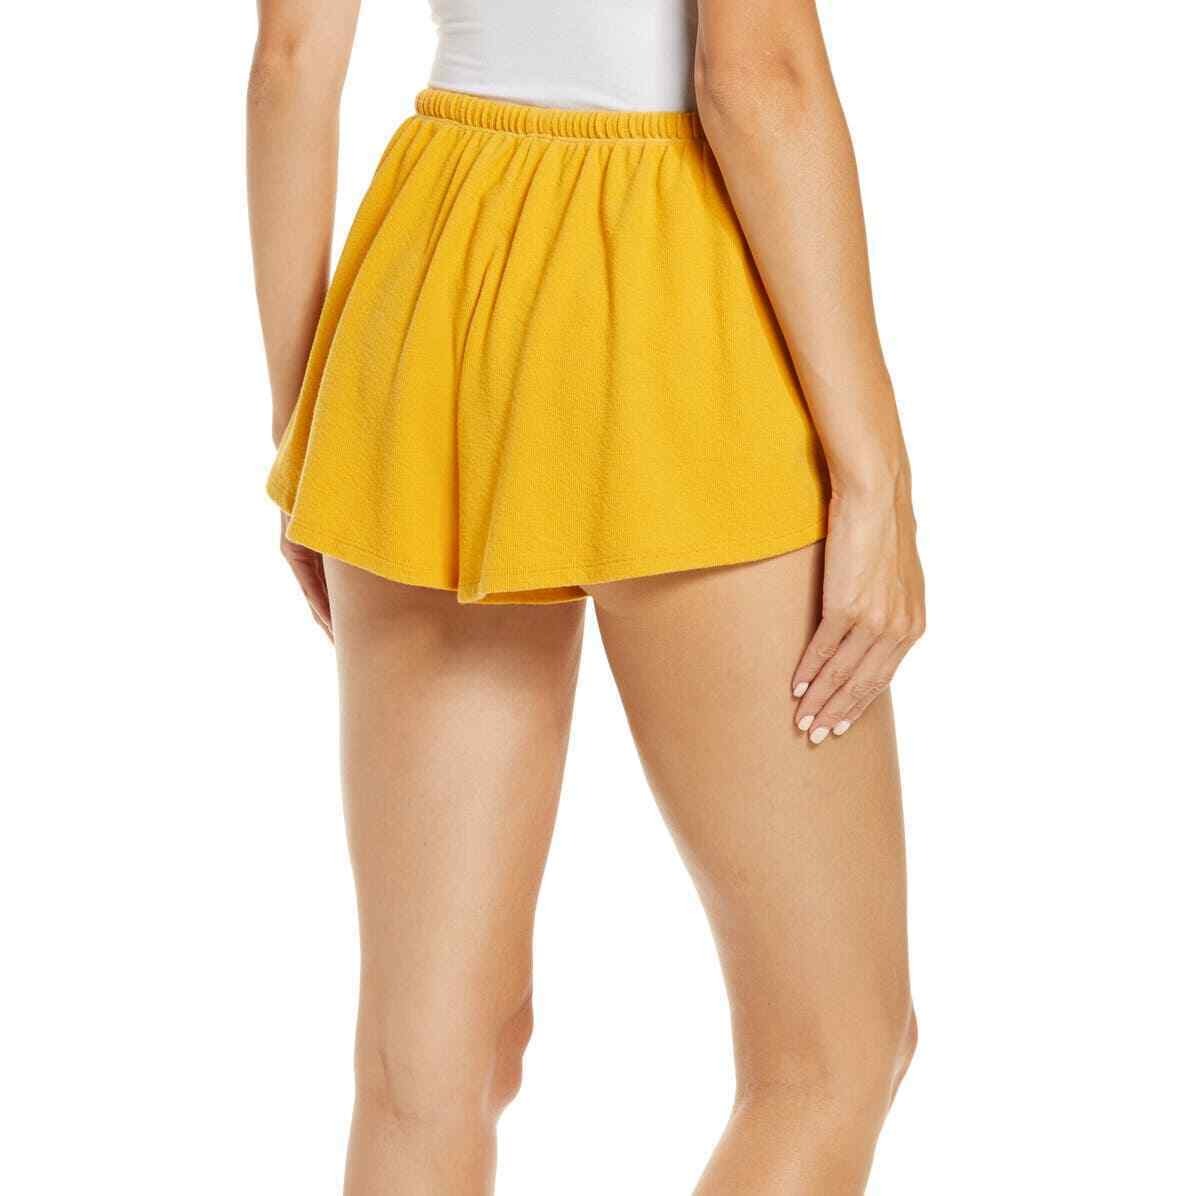 NWT Women's Honeydew Fool for Fall Tie Waist Shorts, Size Small - Yellow